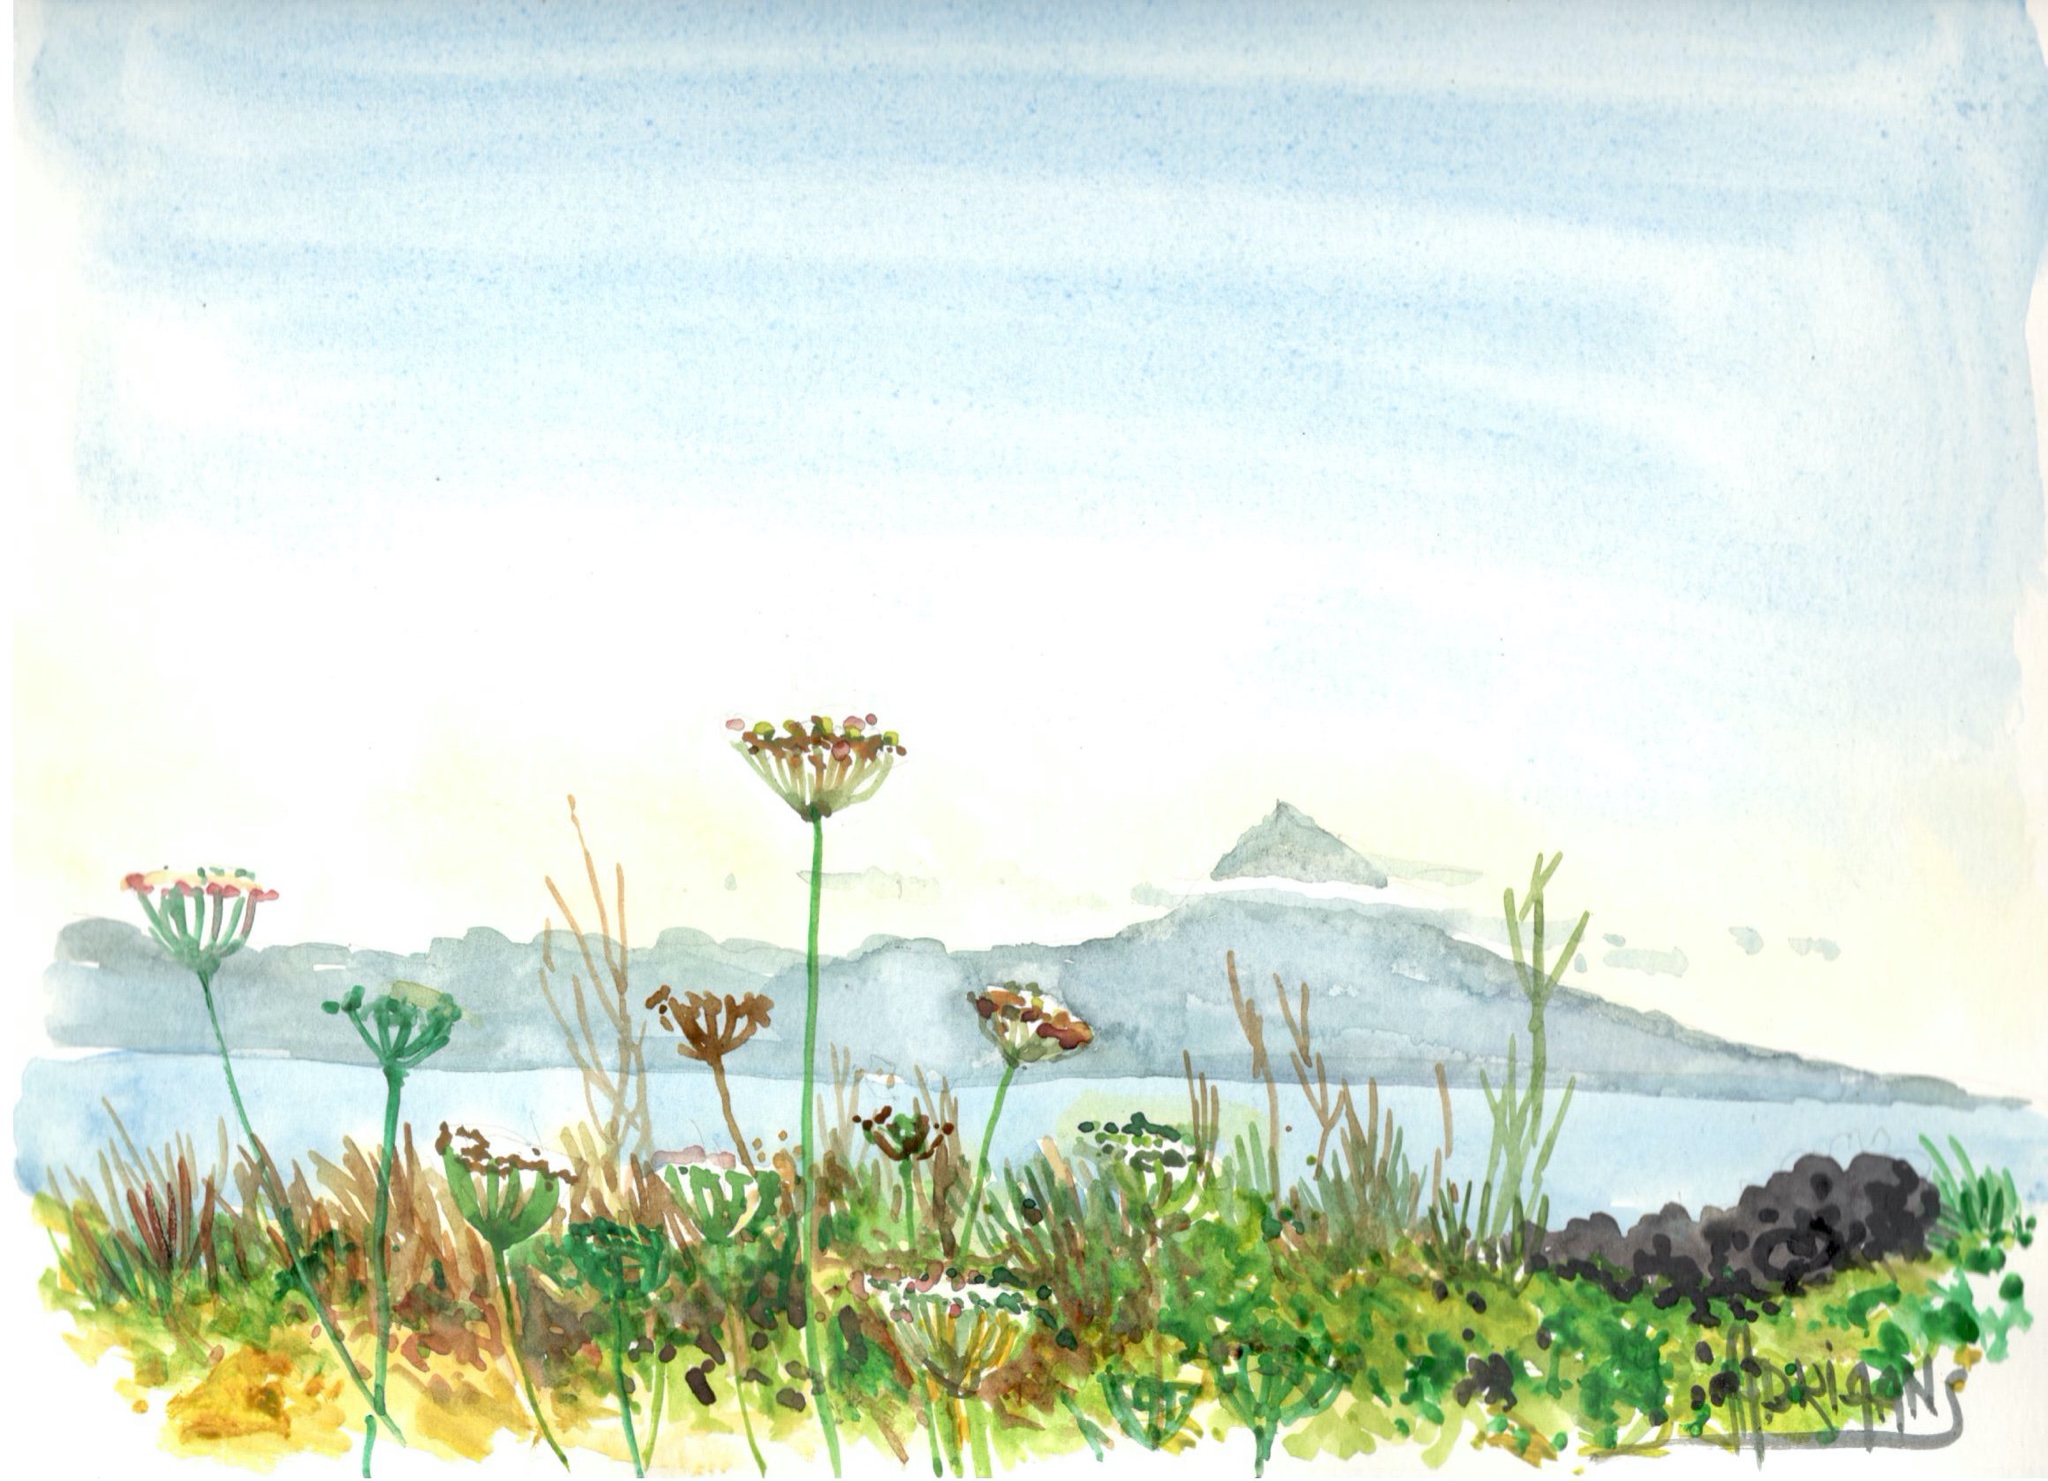 Watercolour I made on one of my morning walks in Manadas. 